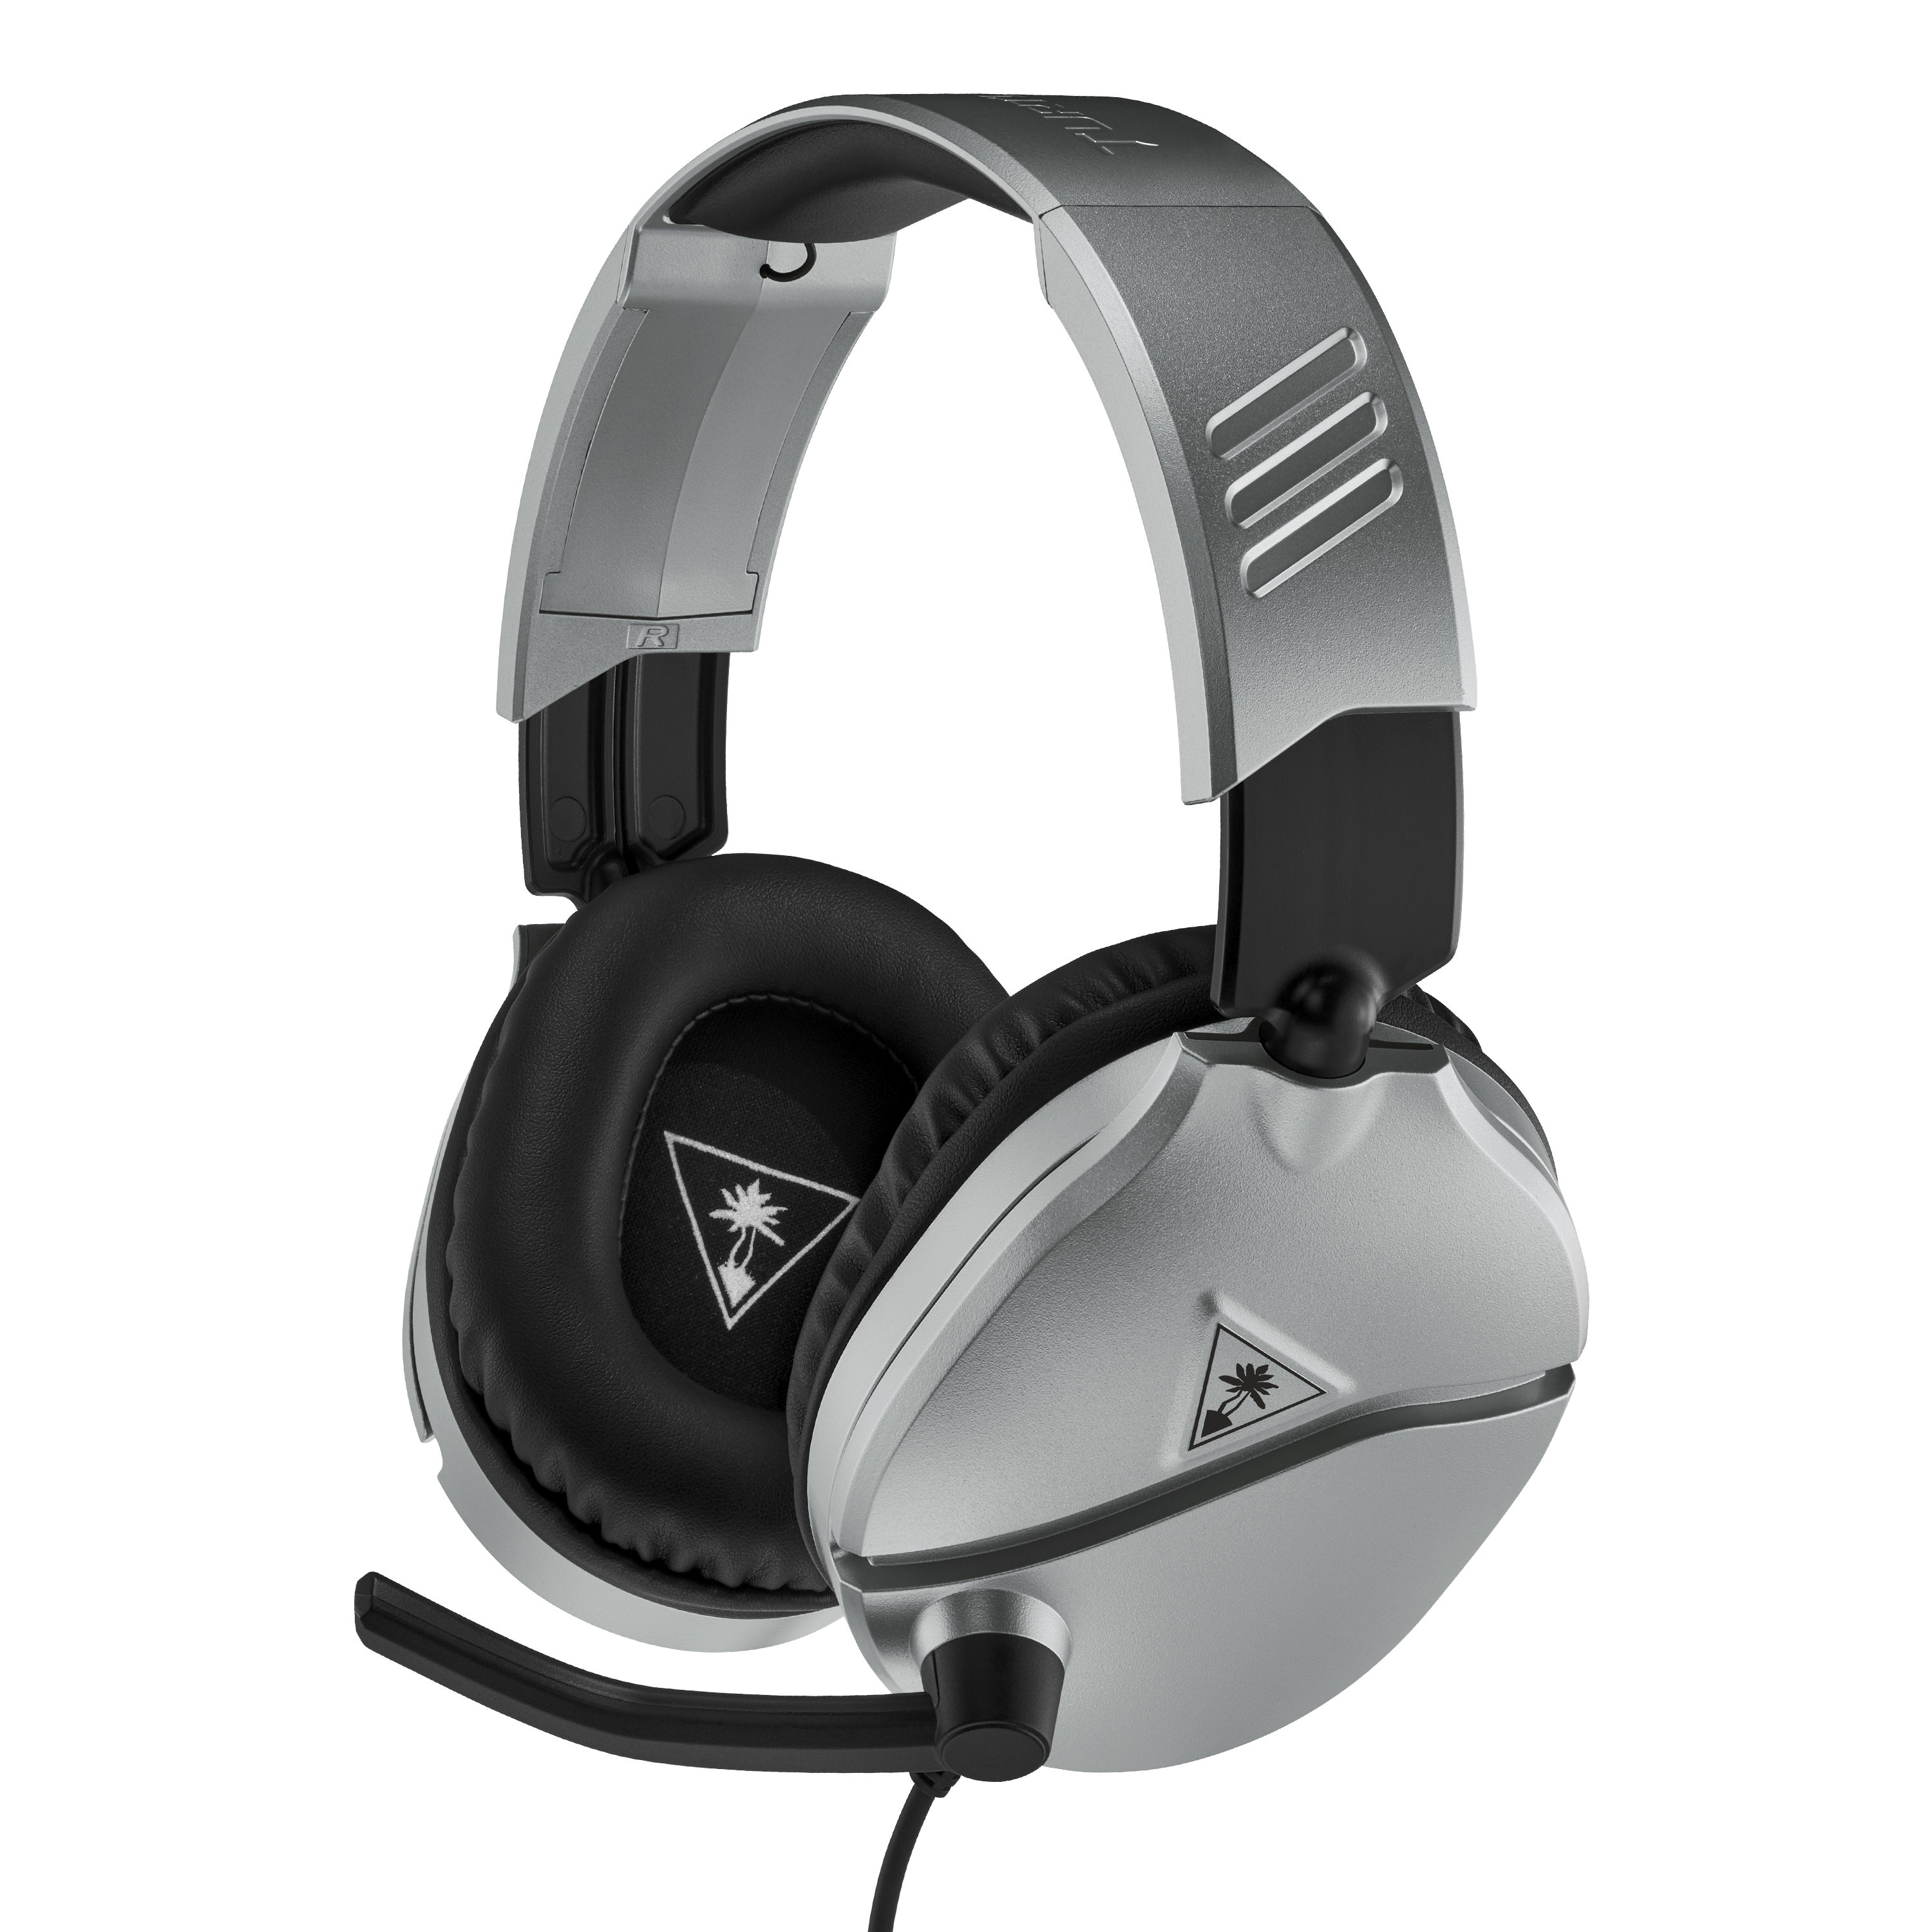 Turtle Beach Recon 70 Xbox Gaming Headset for Xbox Series X, Xbox Series S, Xbox One, PS5, PS4, PlayStation, Nintendo Switch, Mobile, & PC with 3.5mm - Flip-to-Mute Mic, 40mm Speakers - Silver - image 5 of 8